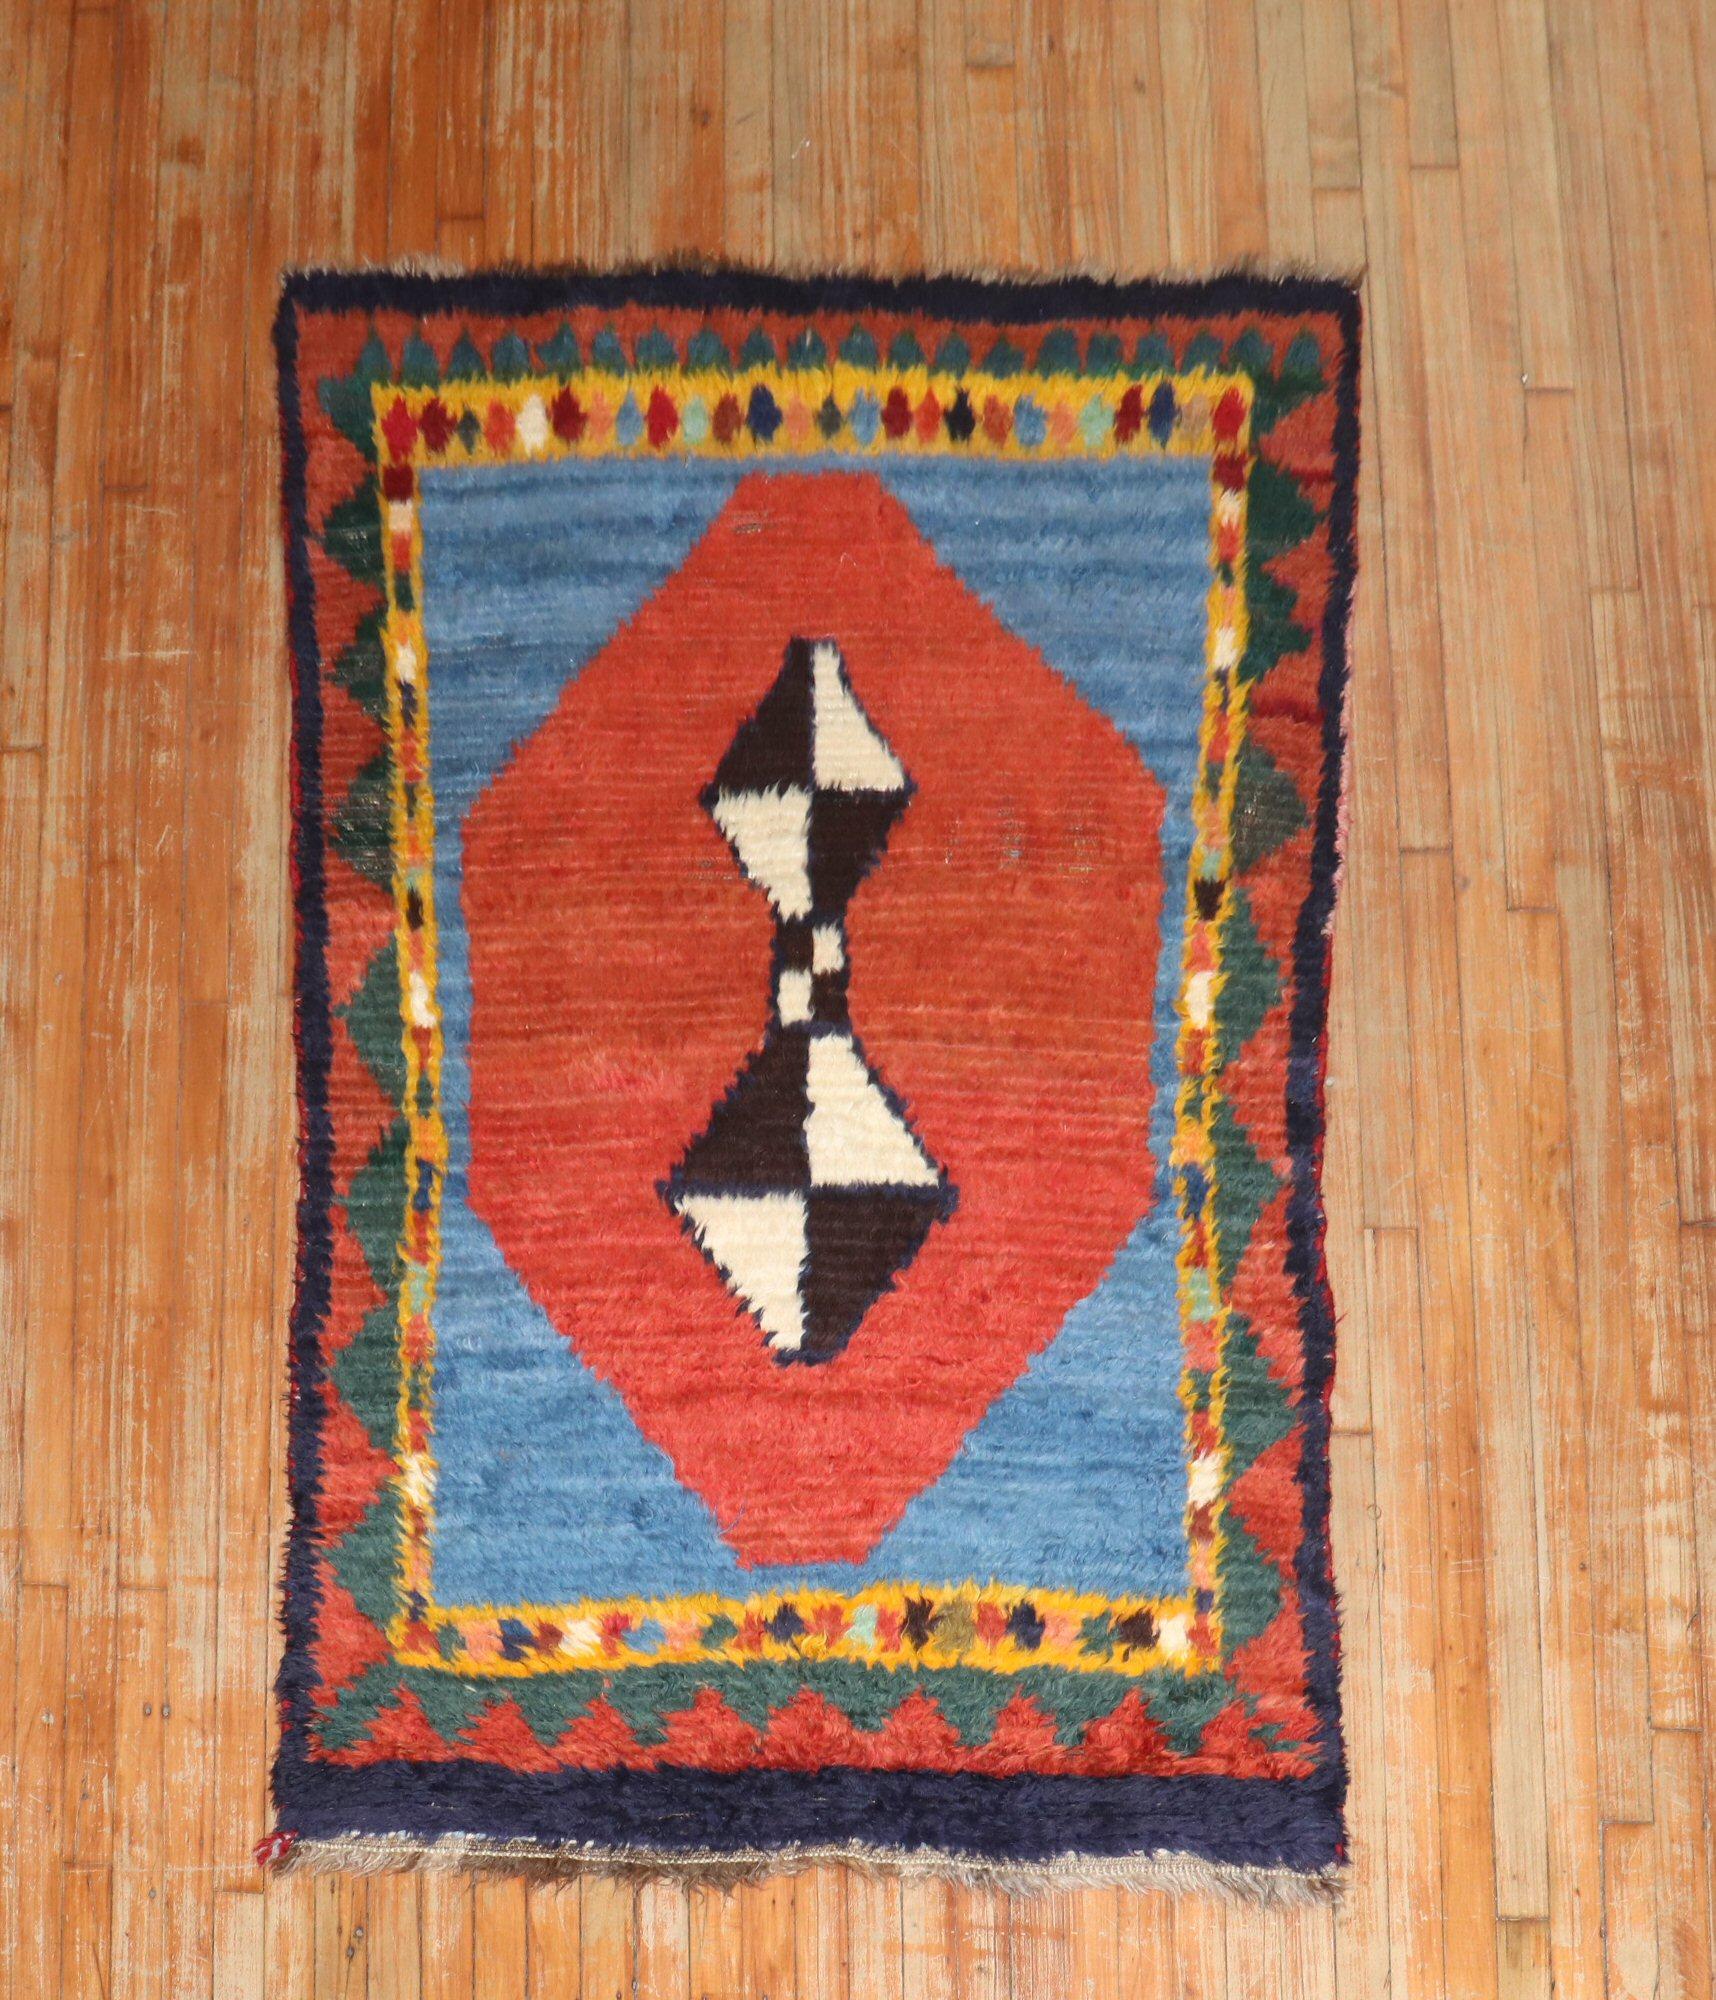 A 1st quarter of the 20th century Double Sised Persian Gabbeh accent-size geometric rug originating from the JP WILLBORG collection. primary-image shown shows 1 side of the rug. the other side consists of a checkerboard design seen in some of the